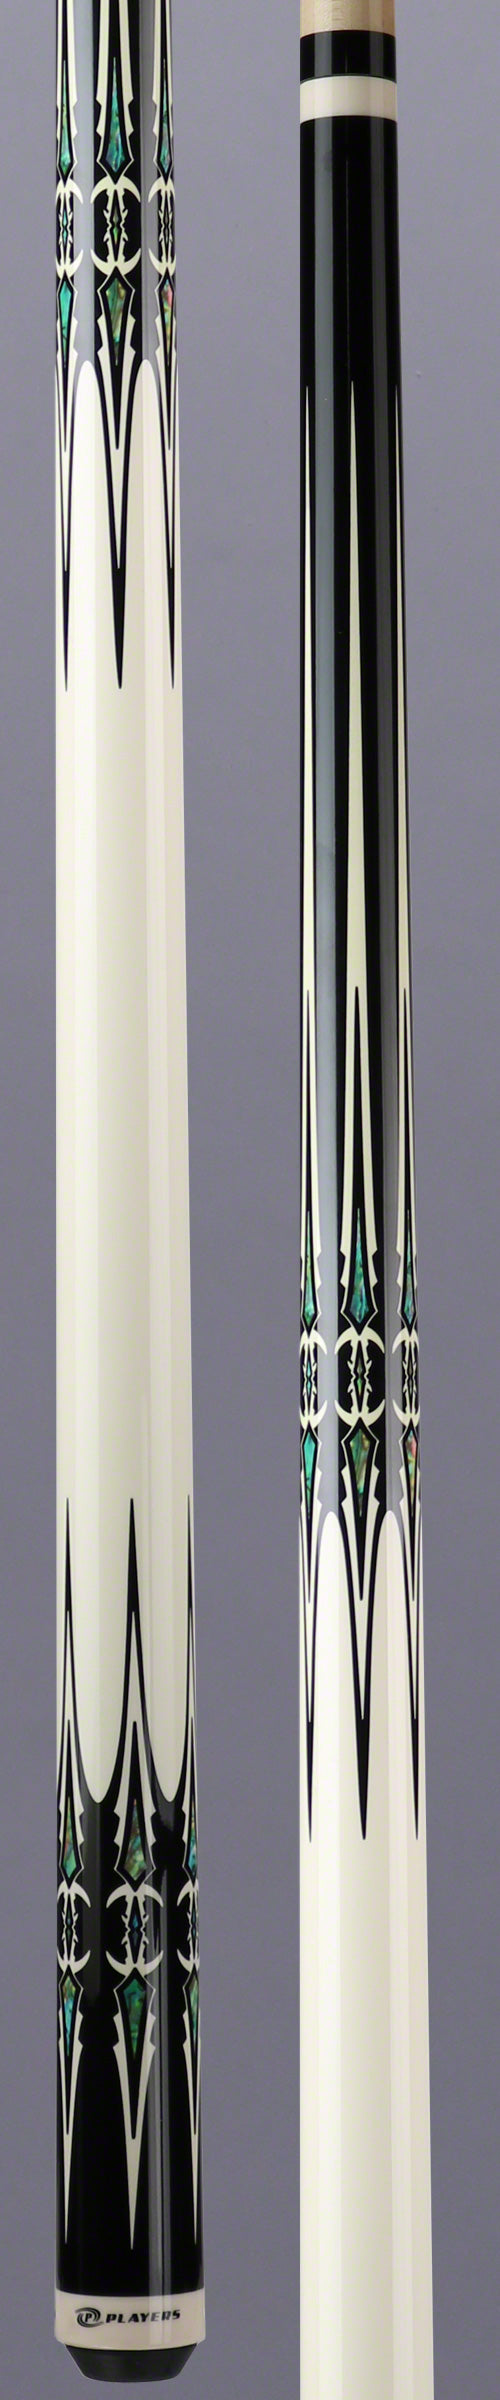 Players G-4112 Pool Cue